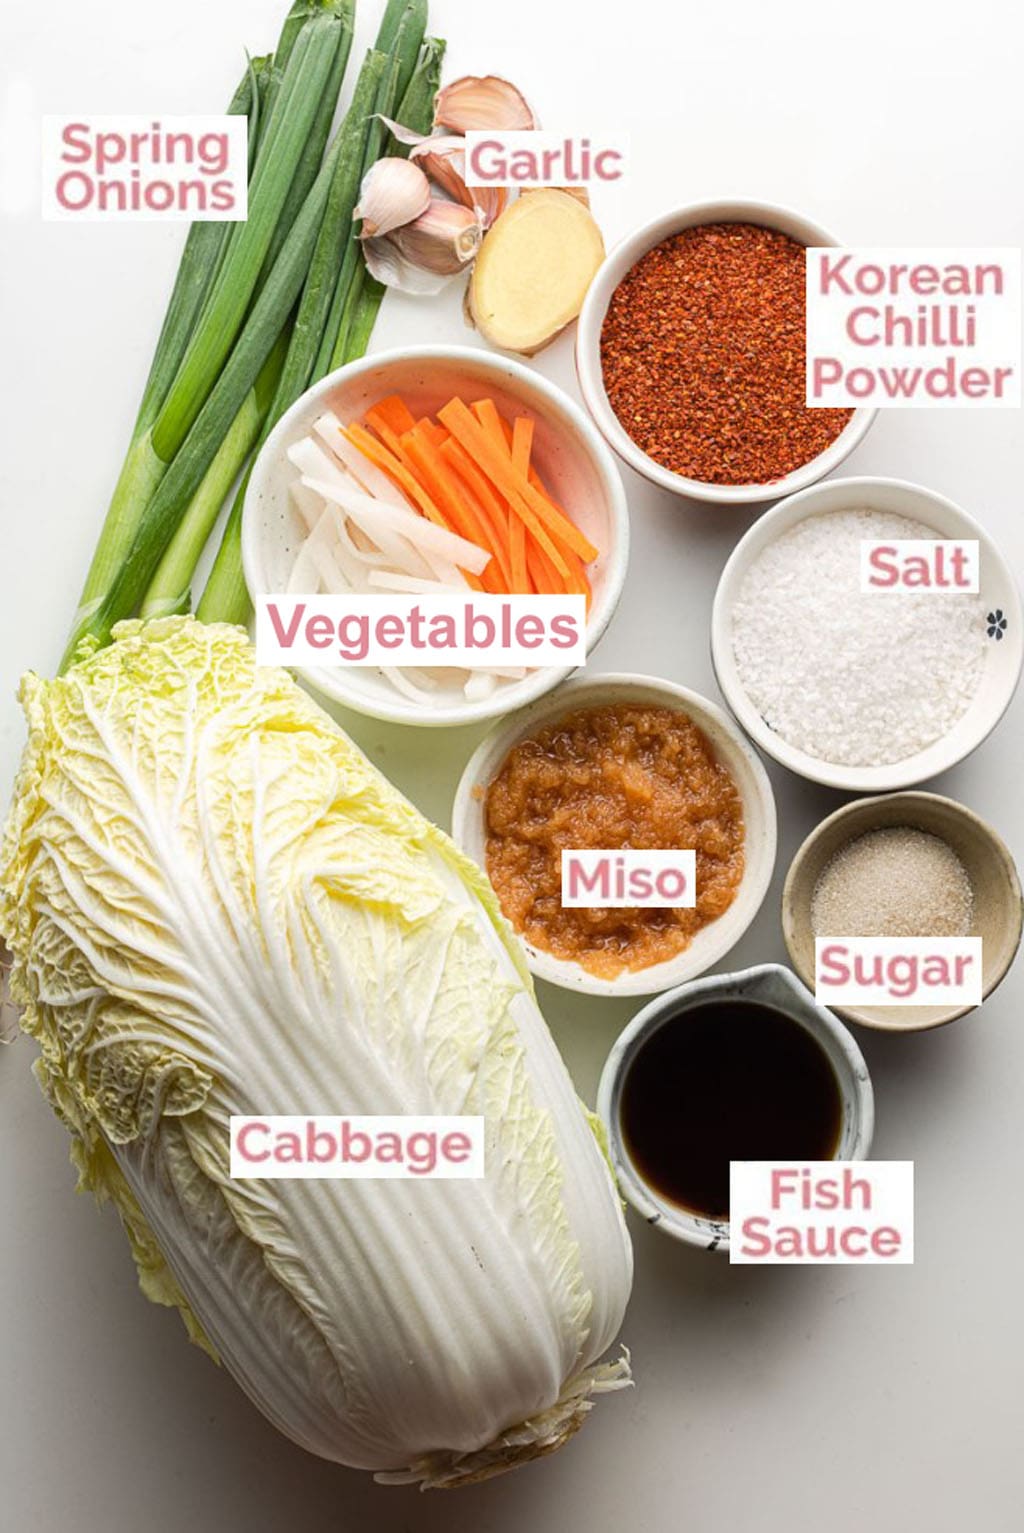 Discover the Health Benefits of Kimchi